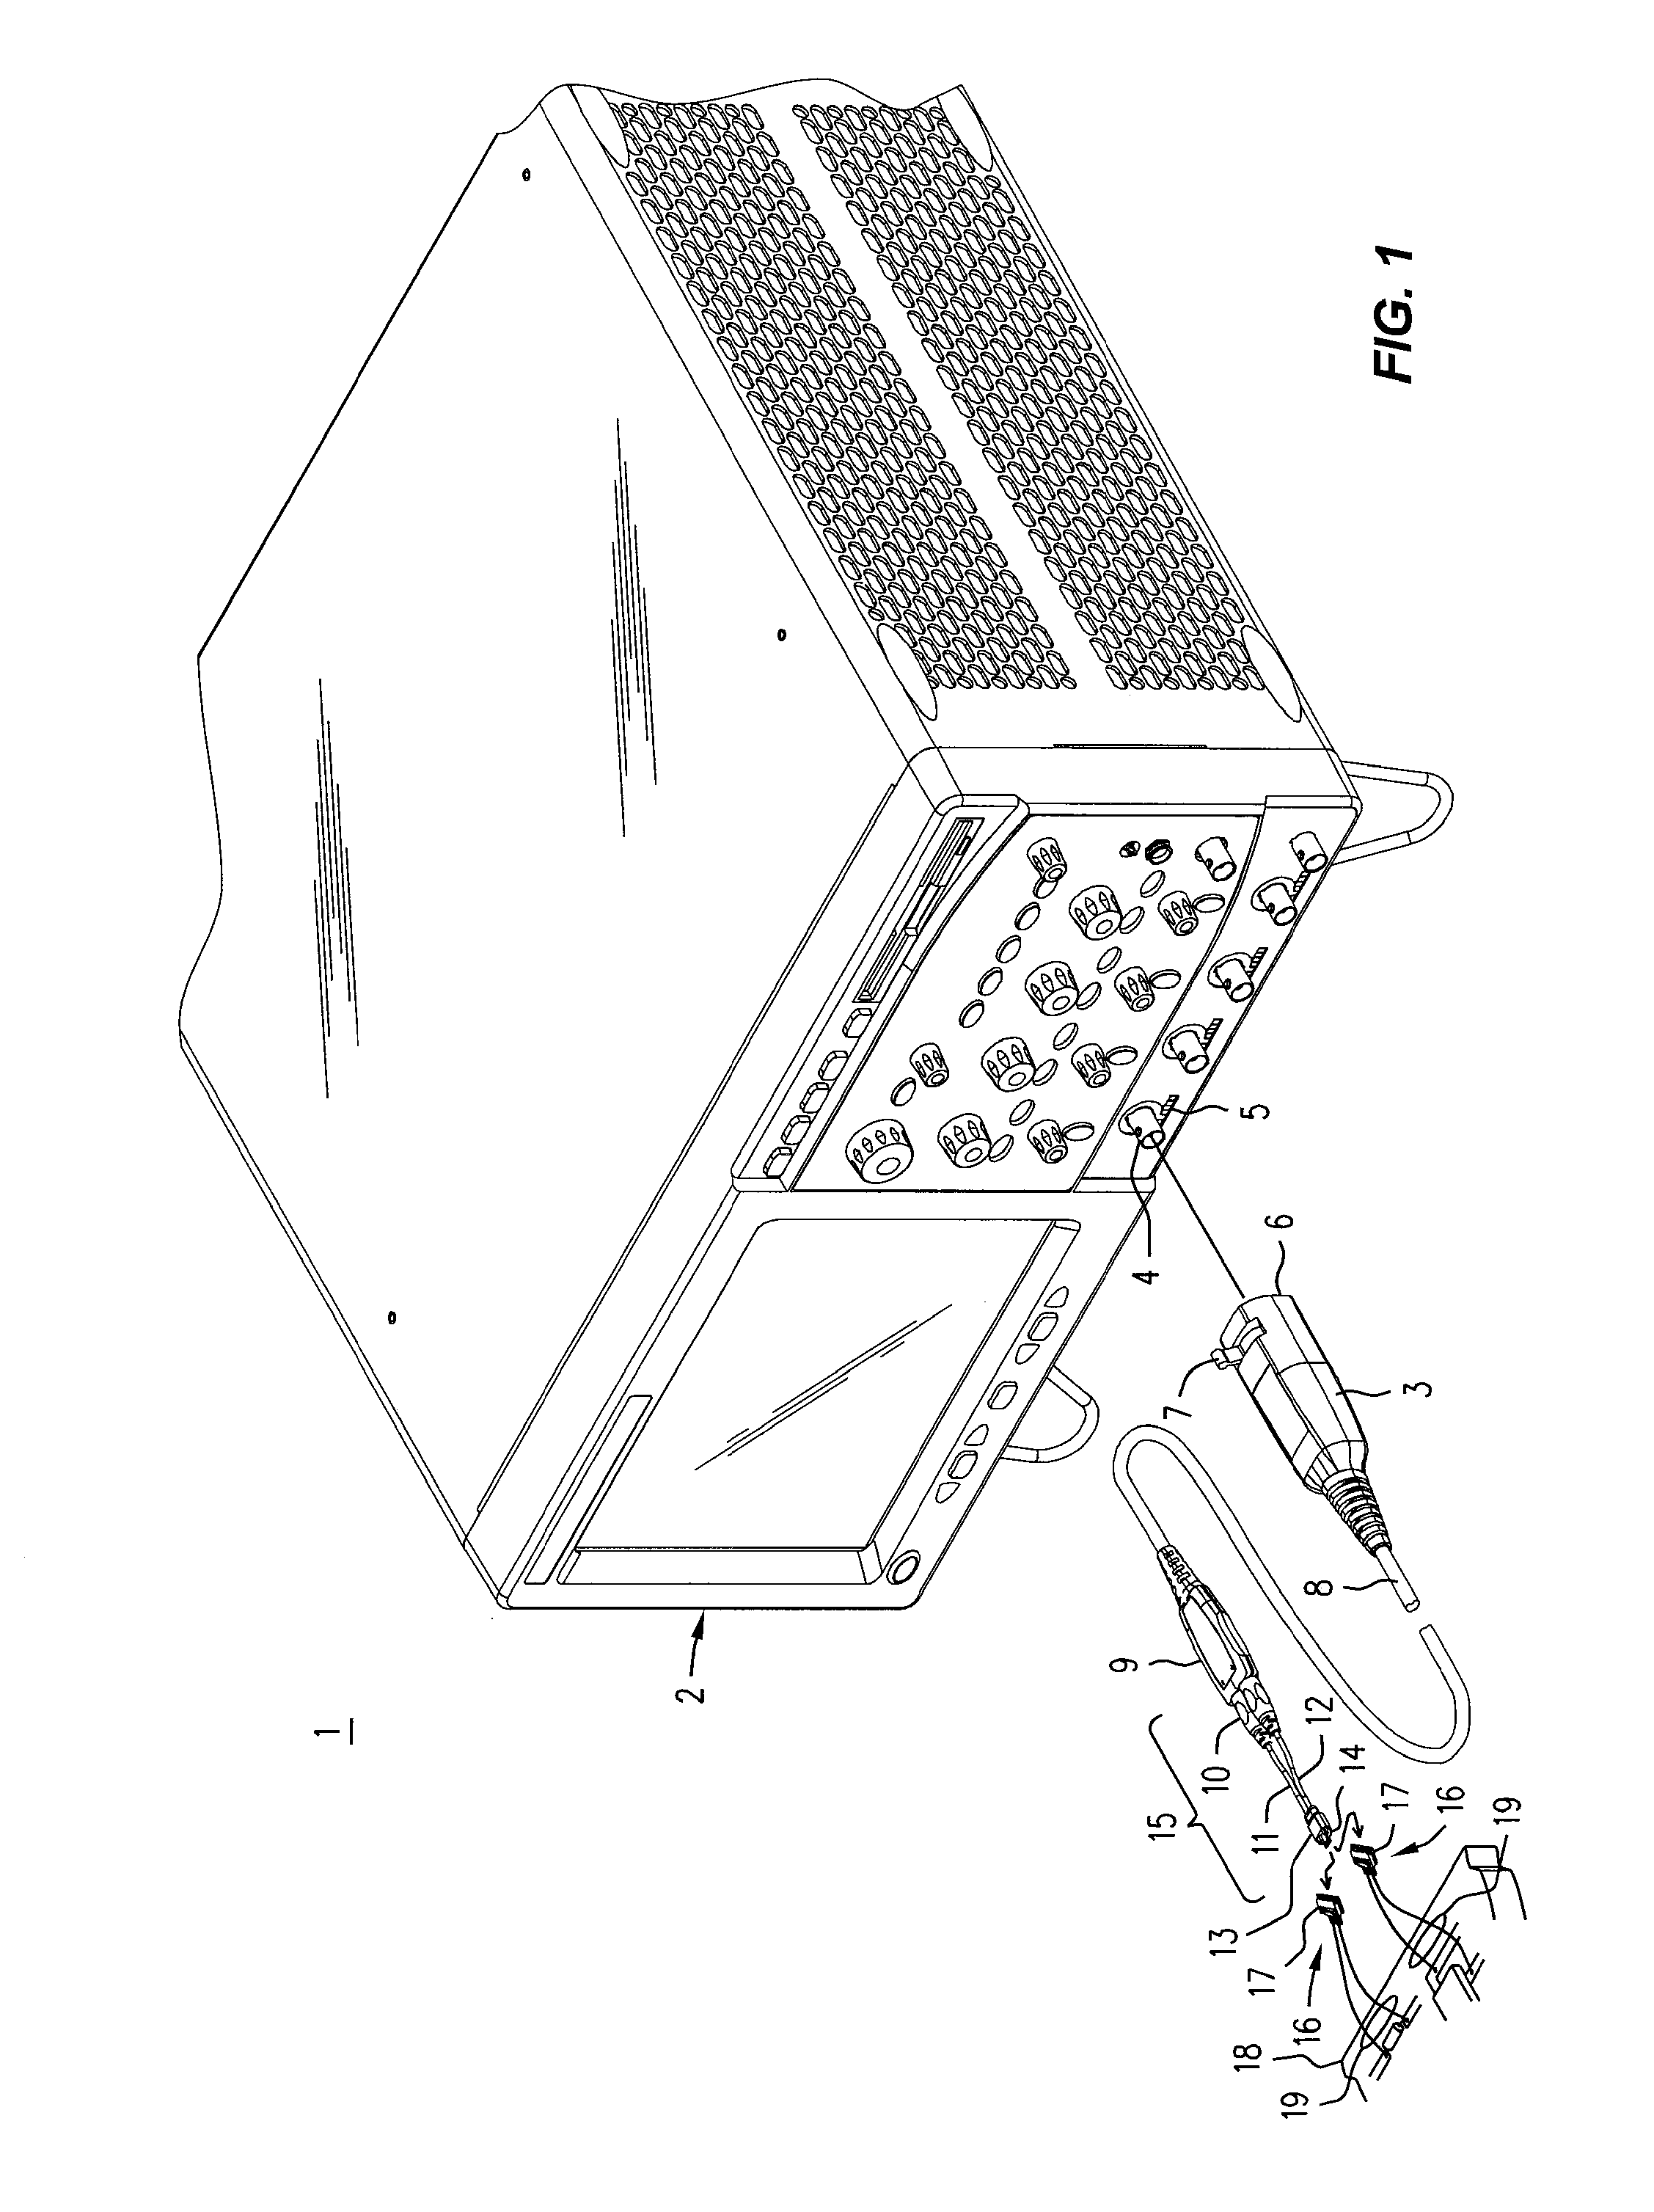 ZIF connection accessory and ZIF browser for an electronic probe